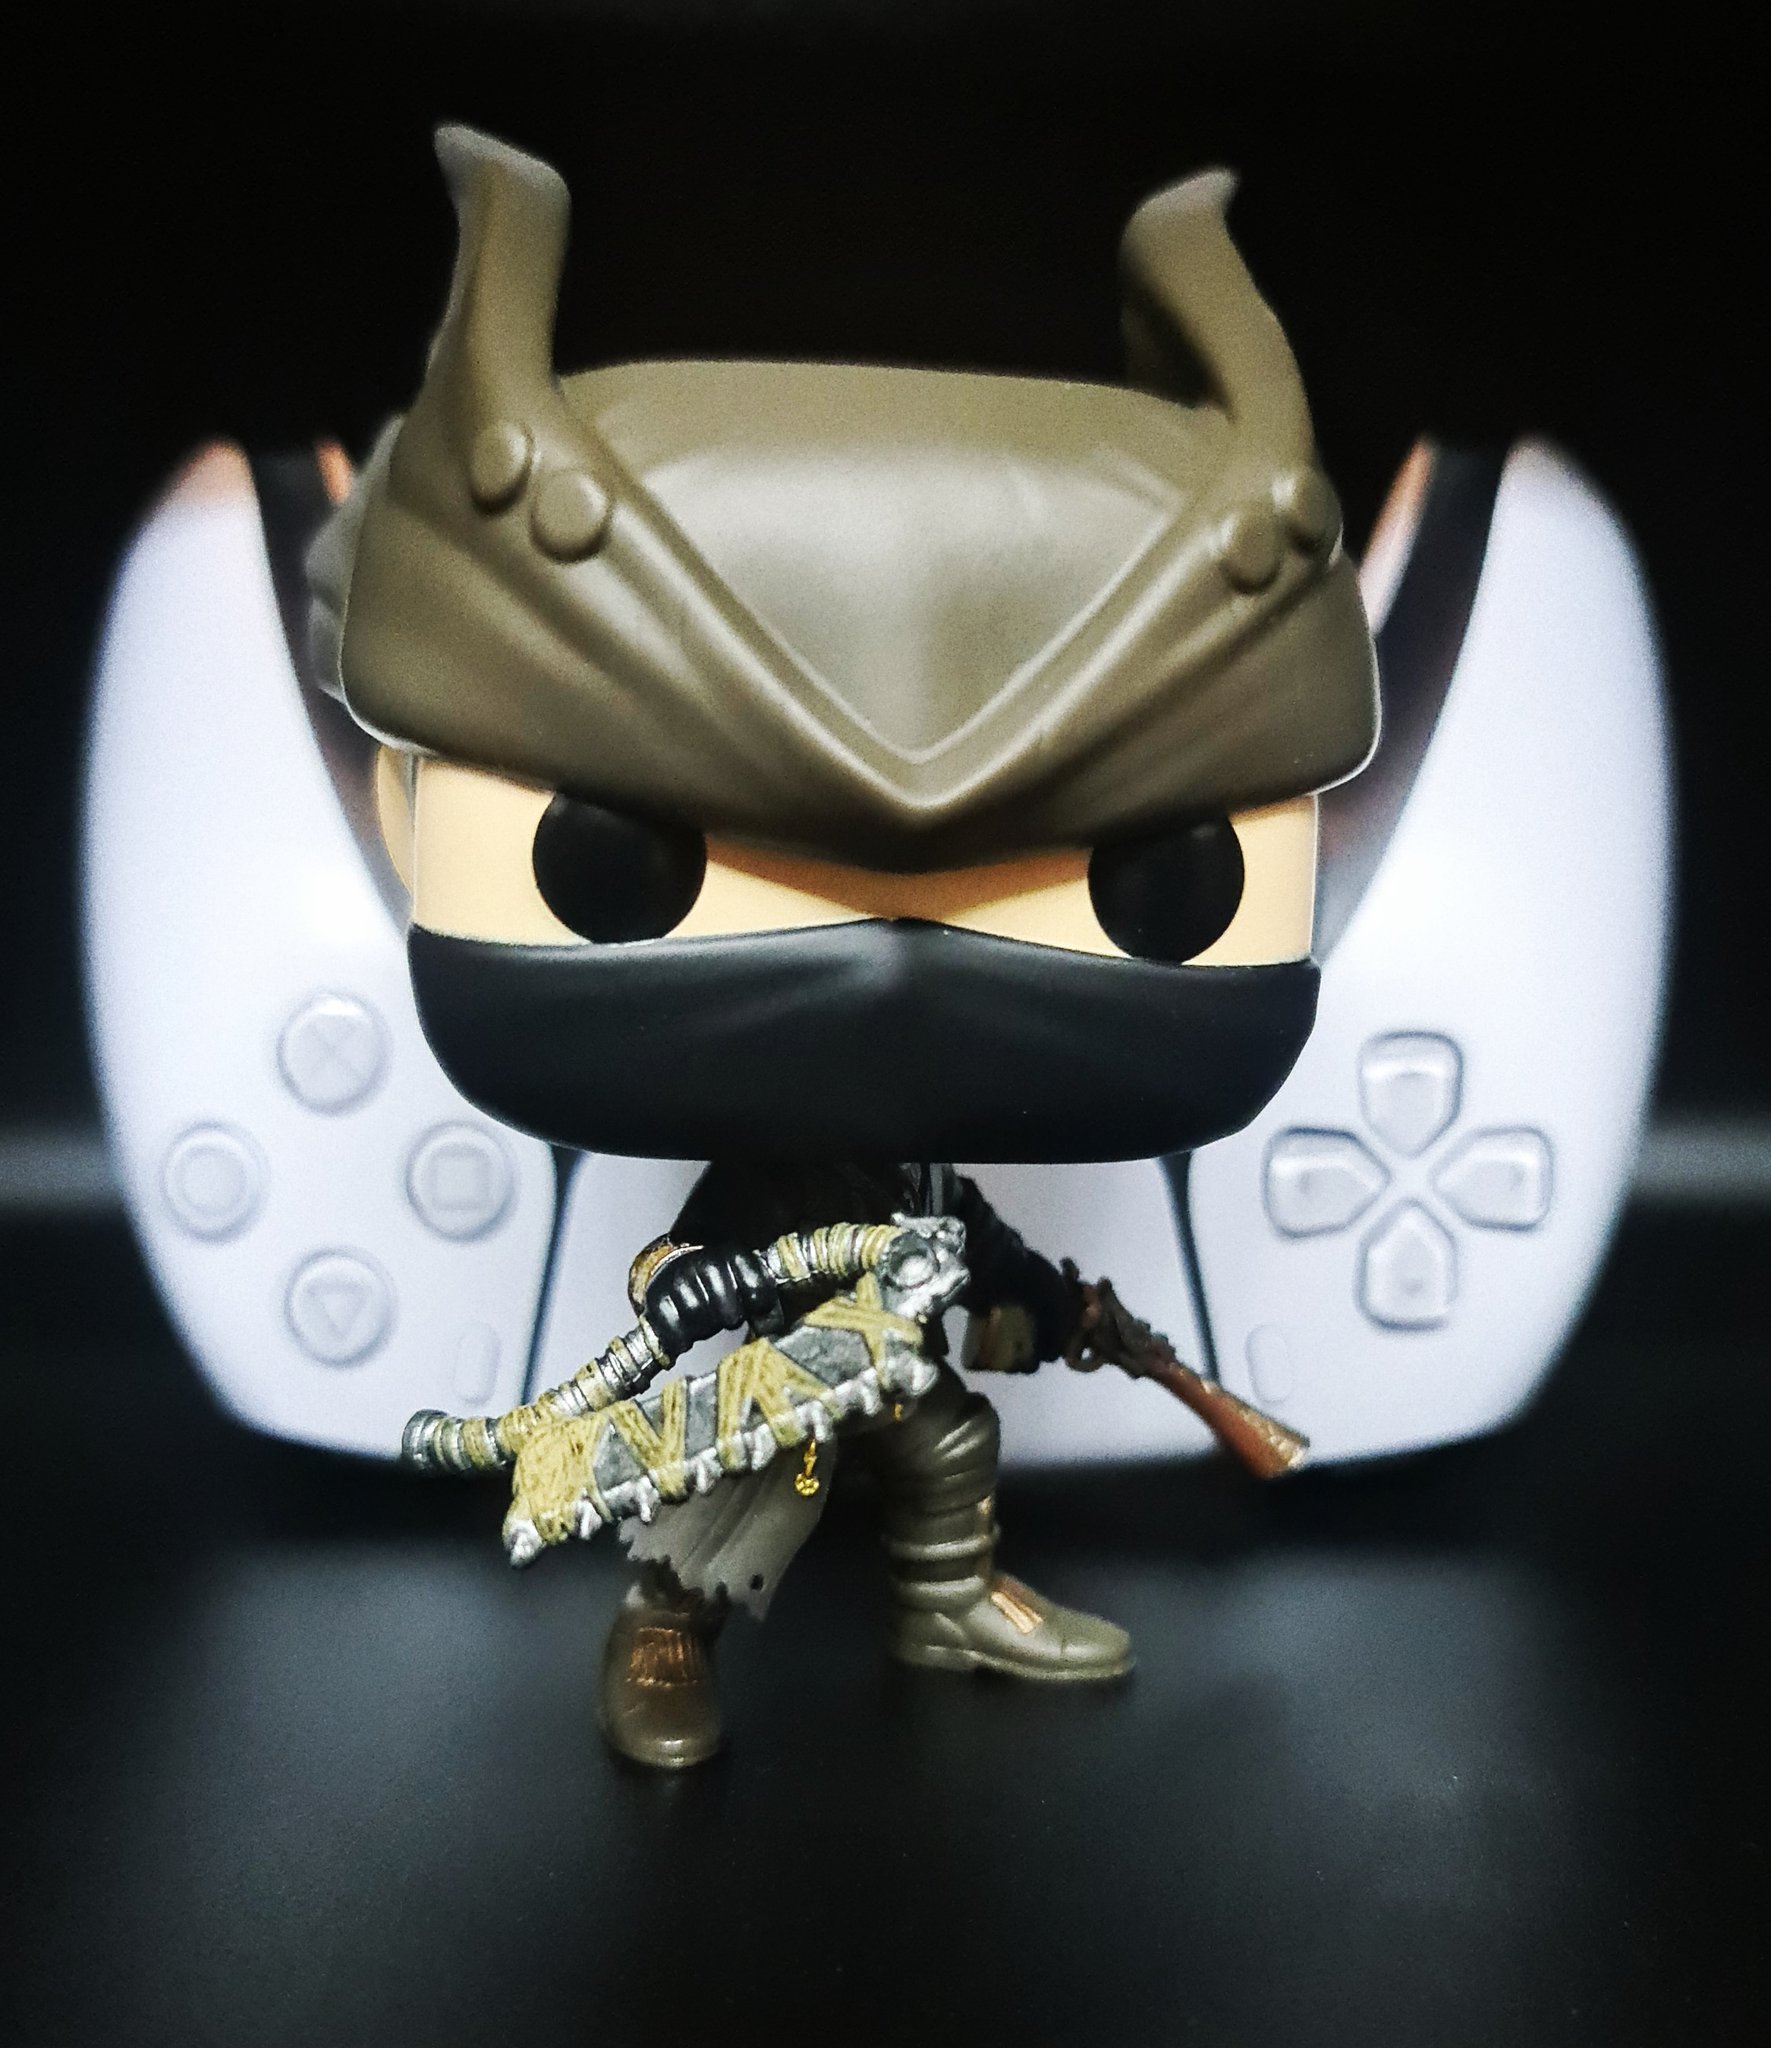 THE ART OF VIDEO GAMES on Twitter: "Funko The Hunter /